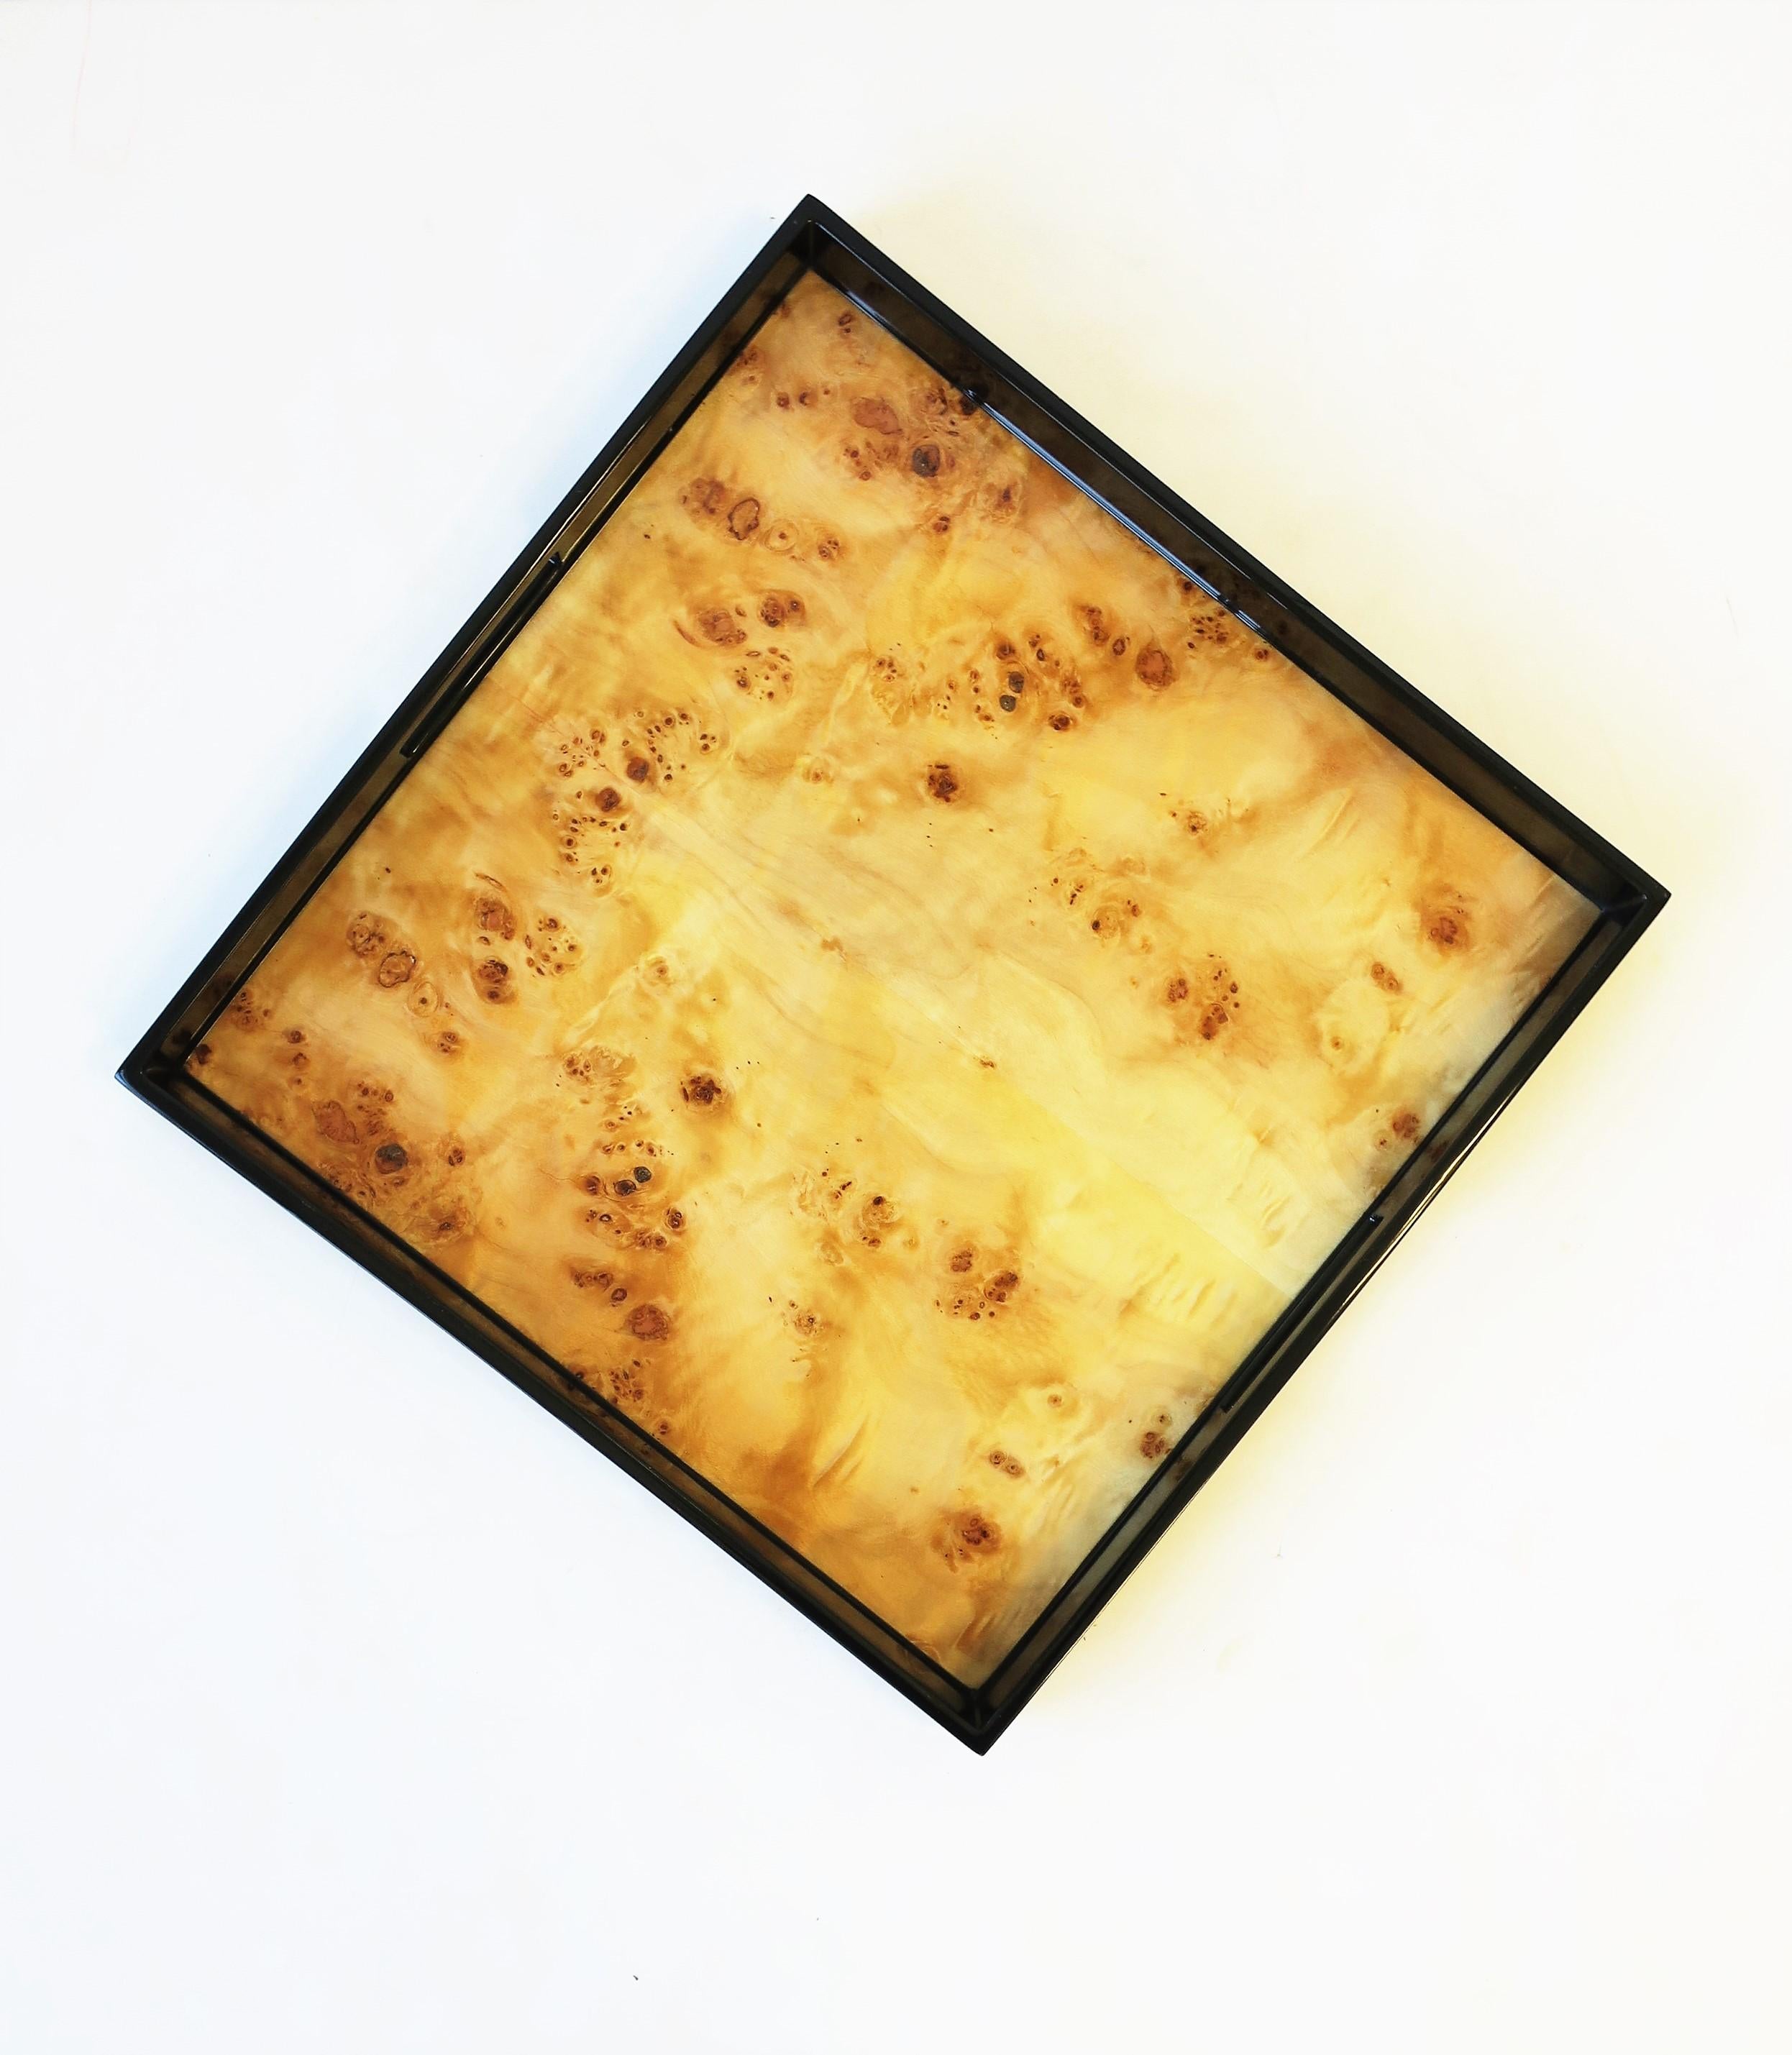 A black lacquer and blonde burl wood serving tray, square, with handles. A great piece for serving or for display. Dimensions: 2